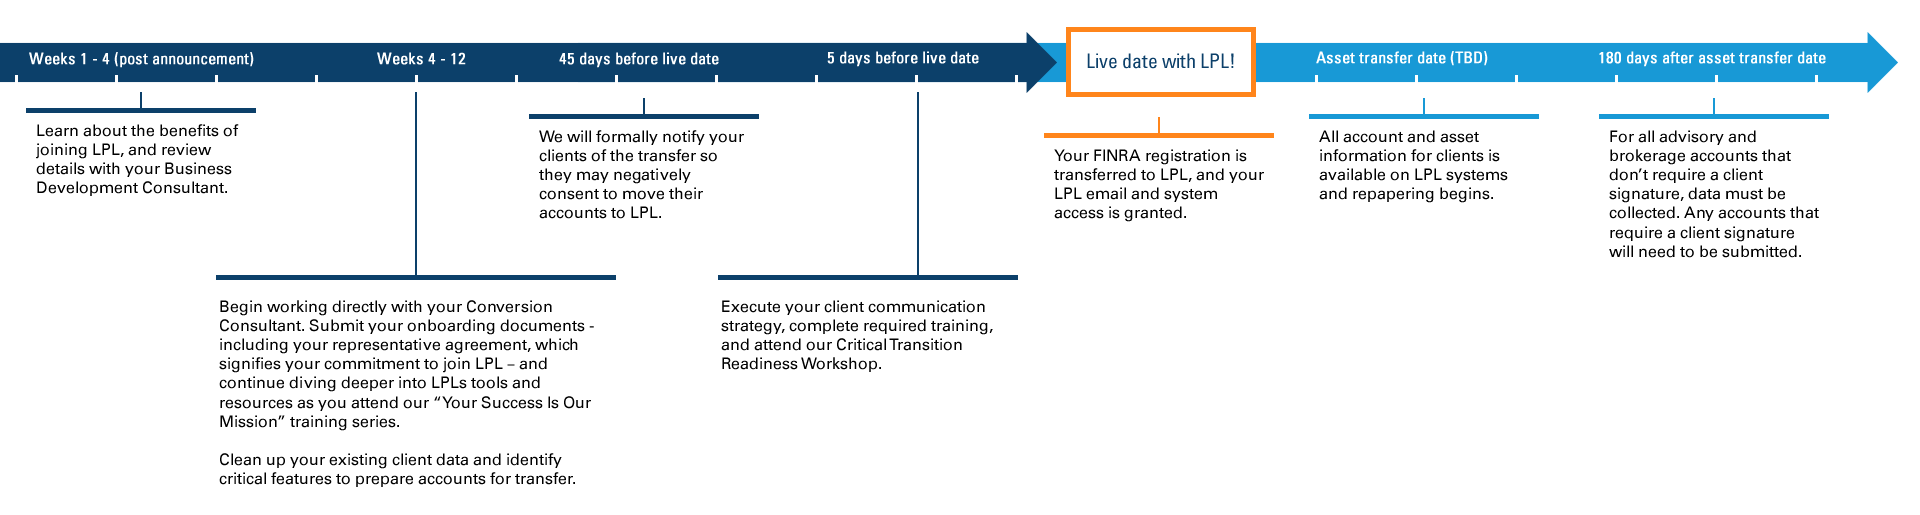 Timeline showing events of transition. Now through week 12 are for learning and preparing to convert. 45 days before live date, negative consent letters are mailed to your clients. On your LPL live date, your FINRA registration is transferred to LPL. Assets transfer on a to-be-determined date following the live date. Any outstanding data and signatures must be collected by 180 days after your transition.